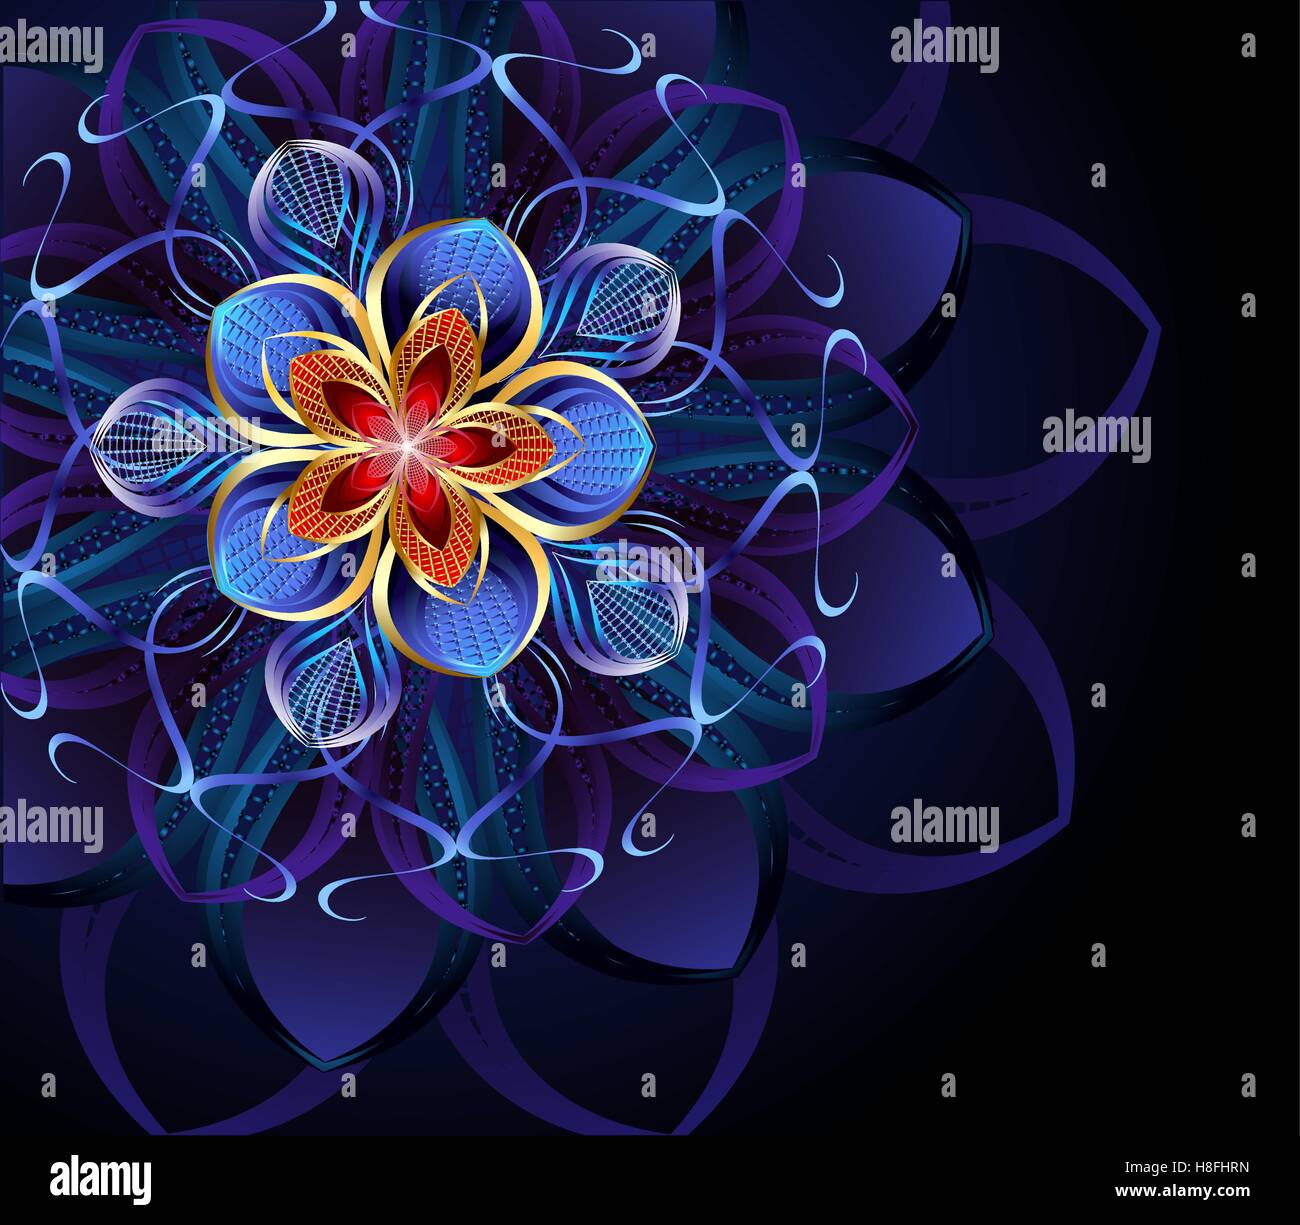 luxurious, abstract blue flower on a dark glowing background. Stock Vector